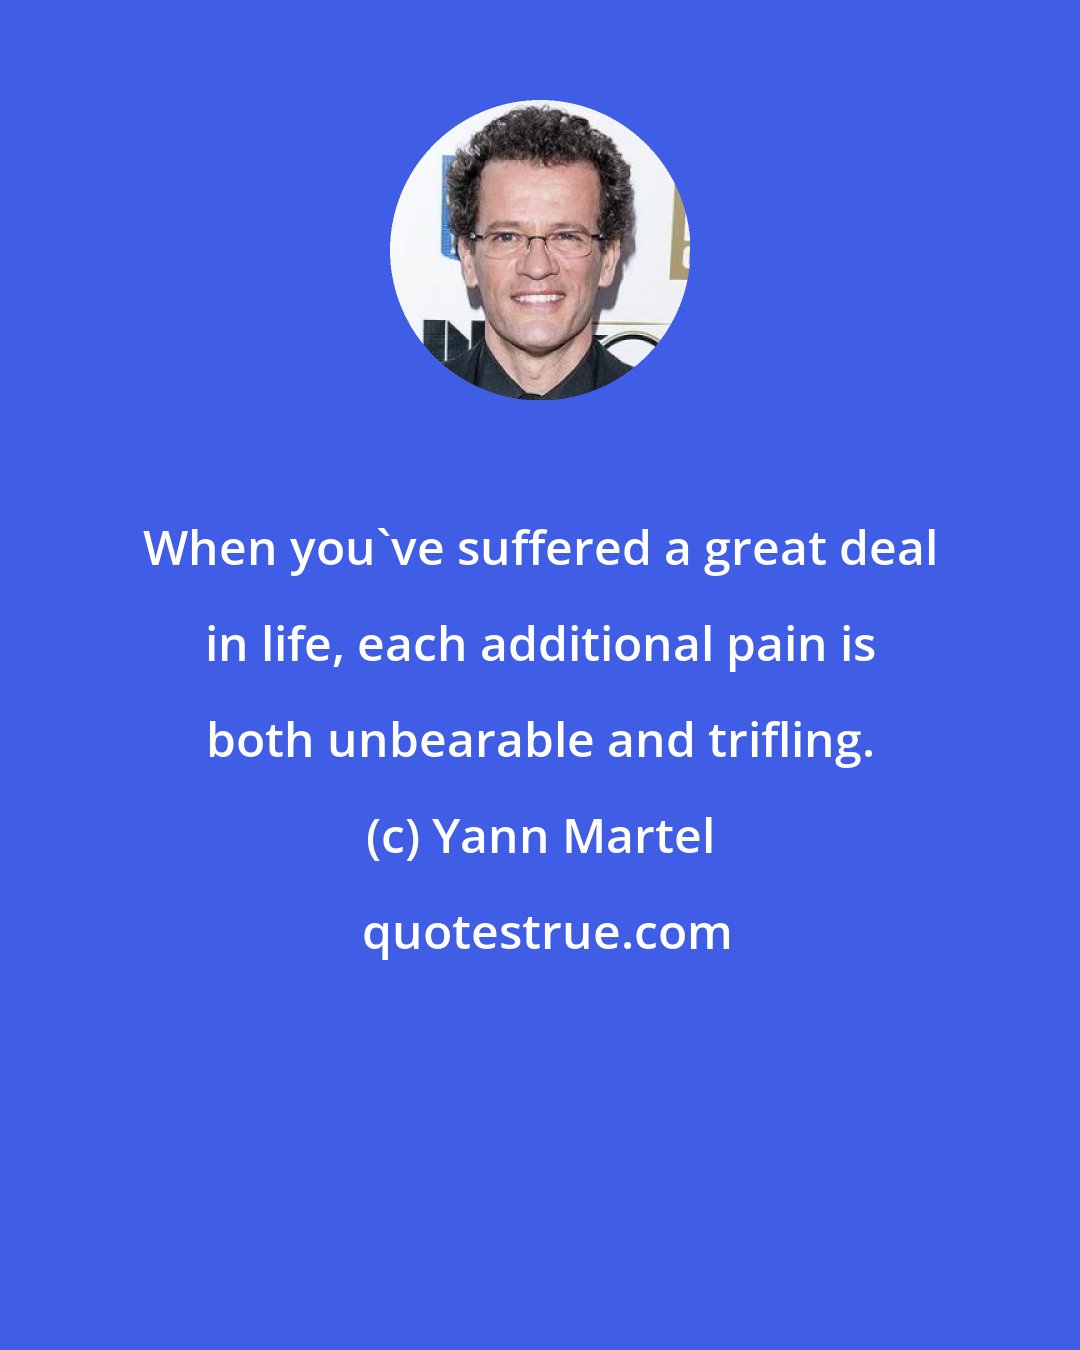 Yann Martel: When you've suffered a great deal in life, each additional pain is both unbearable and trifling.